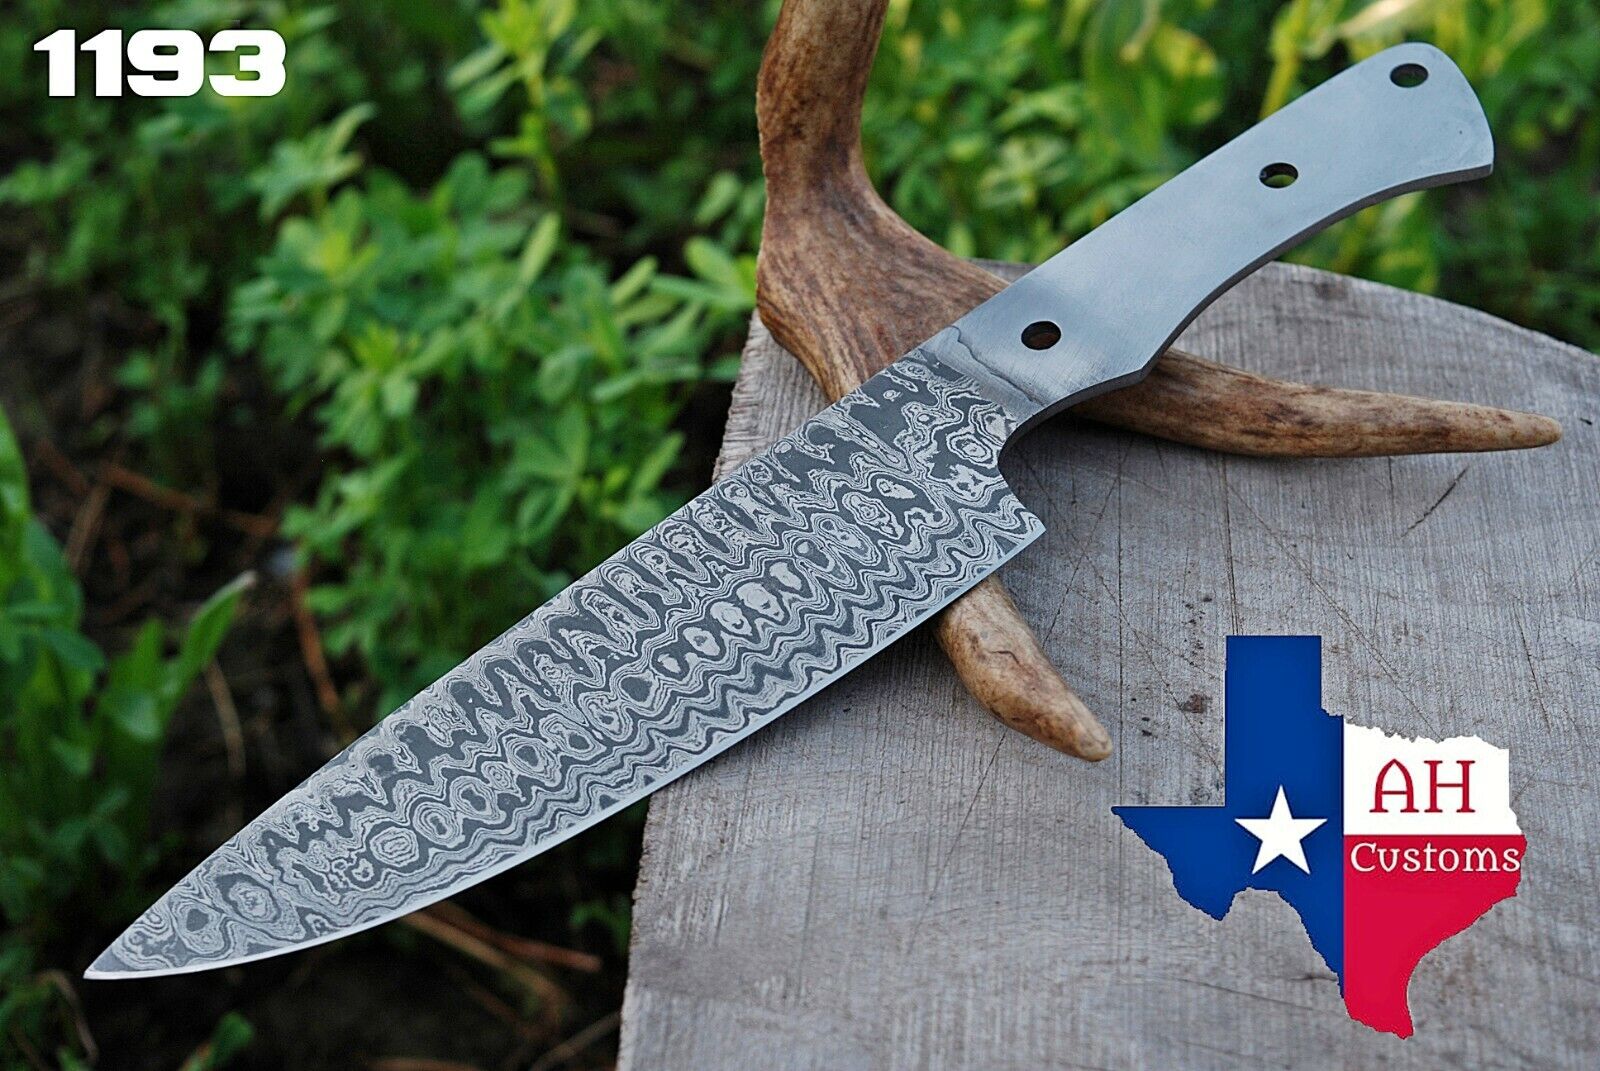 CUSTOM HAND FORGED BLANK BLADE DAMASCUS CHEF KNIFE MAKE YOUR OWN HANDLE AH -1193